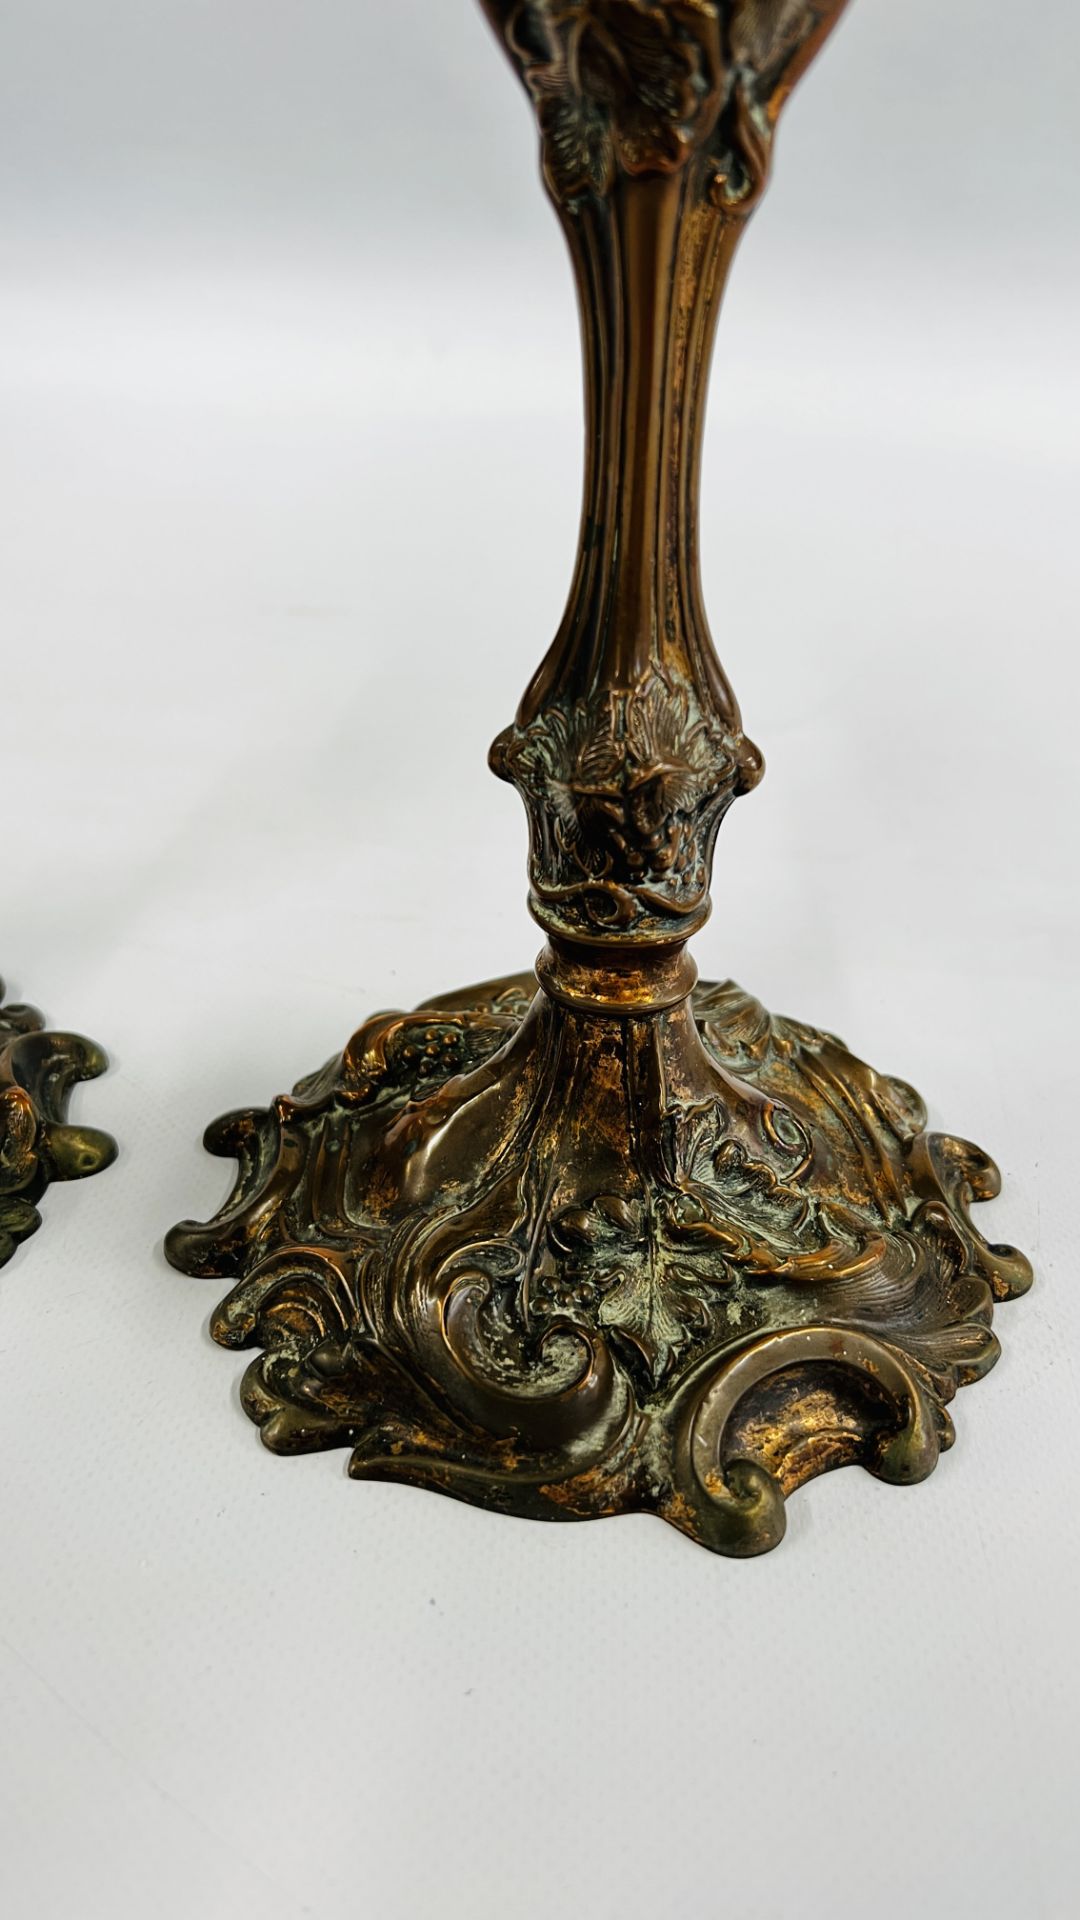 A PAIR OF ORNATE C19TH COPPER CANDLESTICKS WITH DETACHABLE SCONCES - HEIGHT 27CM. - Image 16 of 20